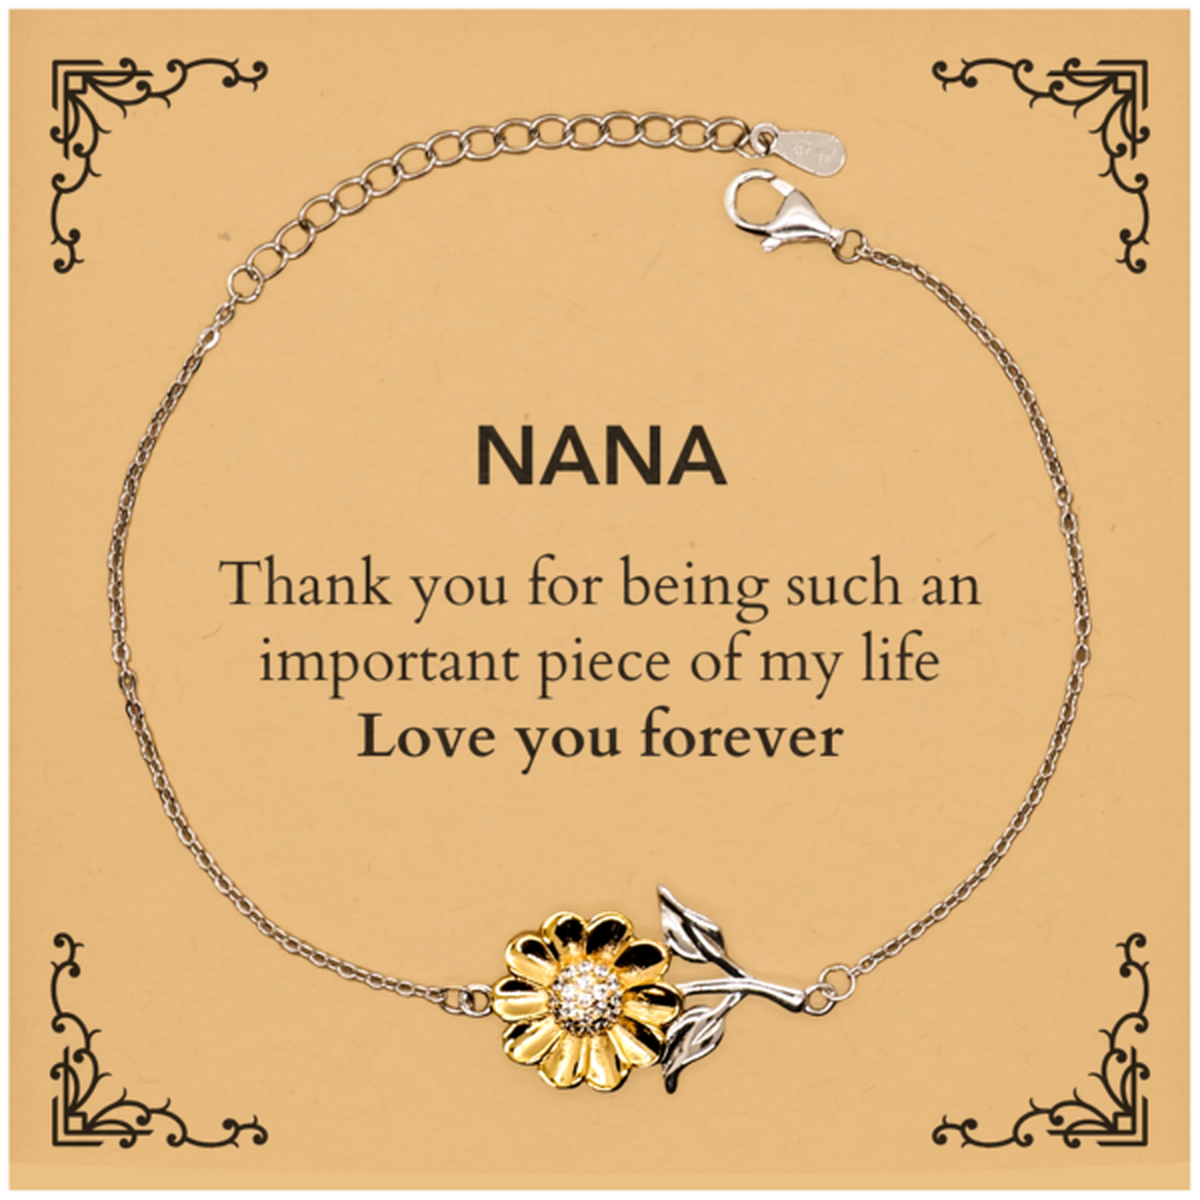 Appropriate Nana Sunflower Bracelet Epic Birthday Gifts for Nana Thank you for being such an important piece of my life Nana Christmas Mothers Fathers Day